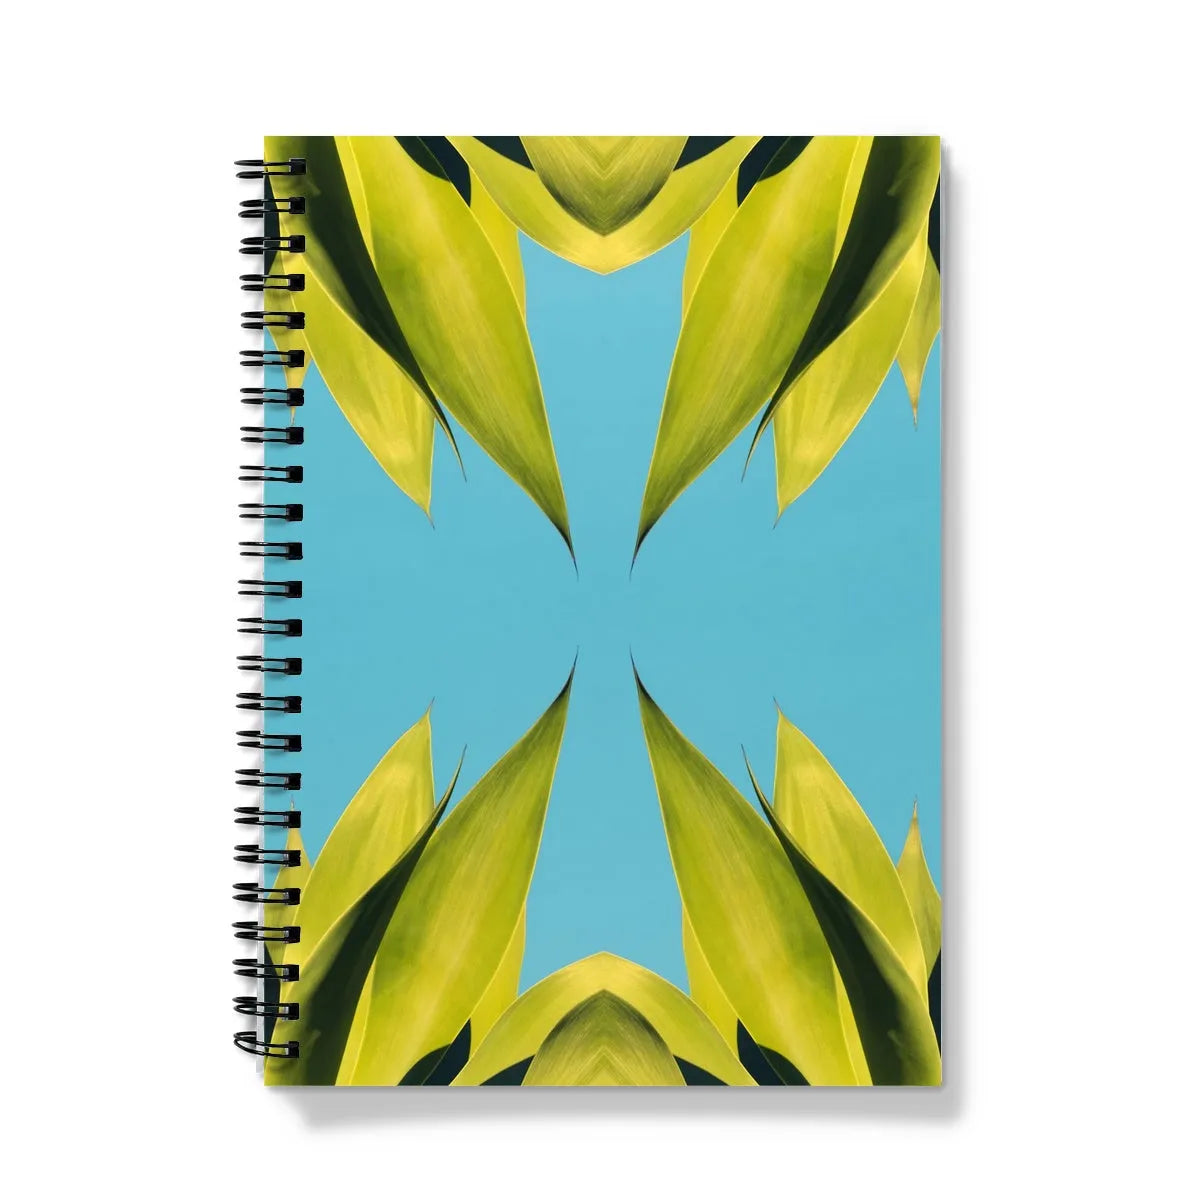 In Bloom Notebook - A5 / A5 - Graph Paper - Notebooks & Notepads - Aesthetic Art